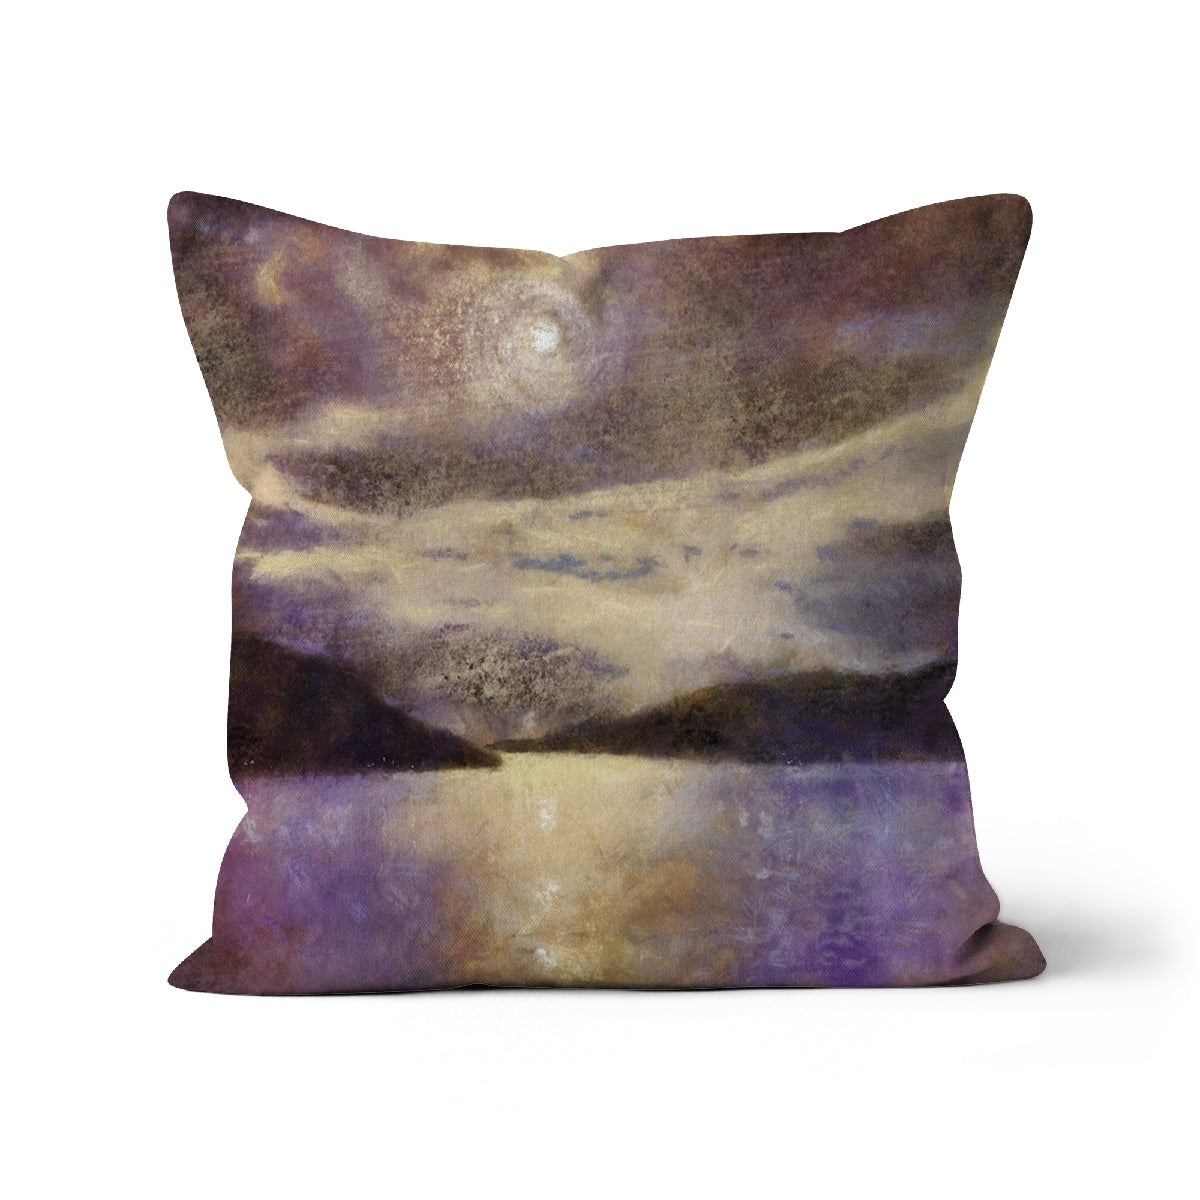 Moonlight Meets Lewis & Harris Art Gifts Cushion-Cushions-Hebridean Islands Art Gallery-Faux Suede-12"x12"-Paintings, Prints, Homeware, Art Gifts From Scotland By Scottish Artist Kevin Hunter